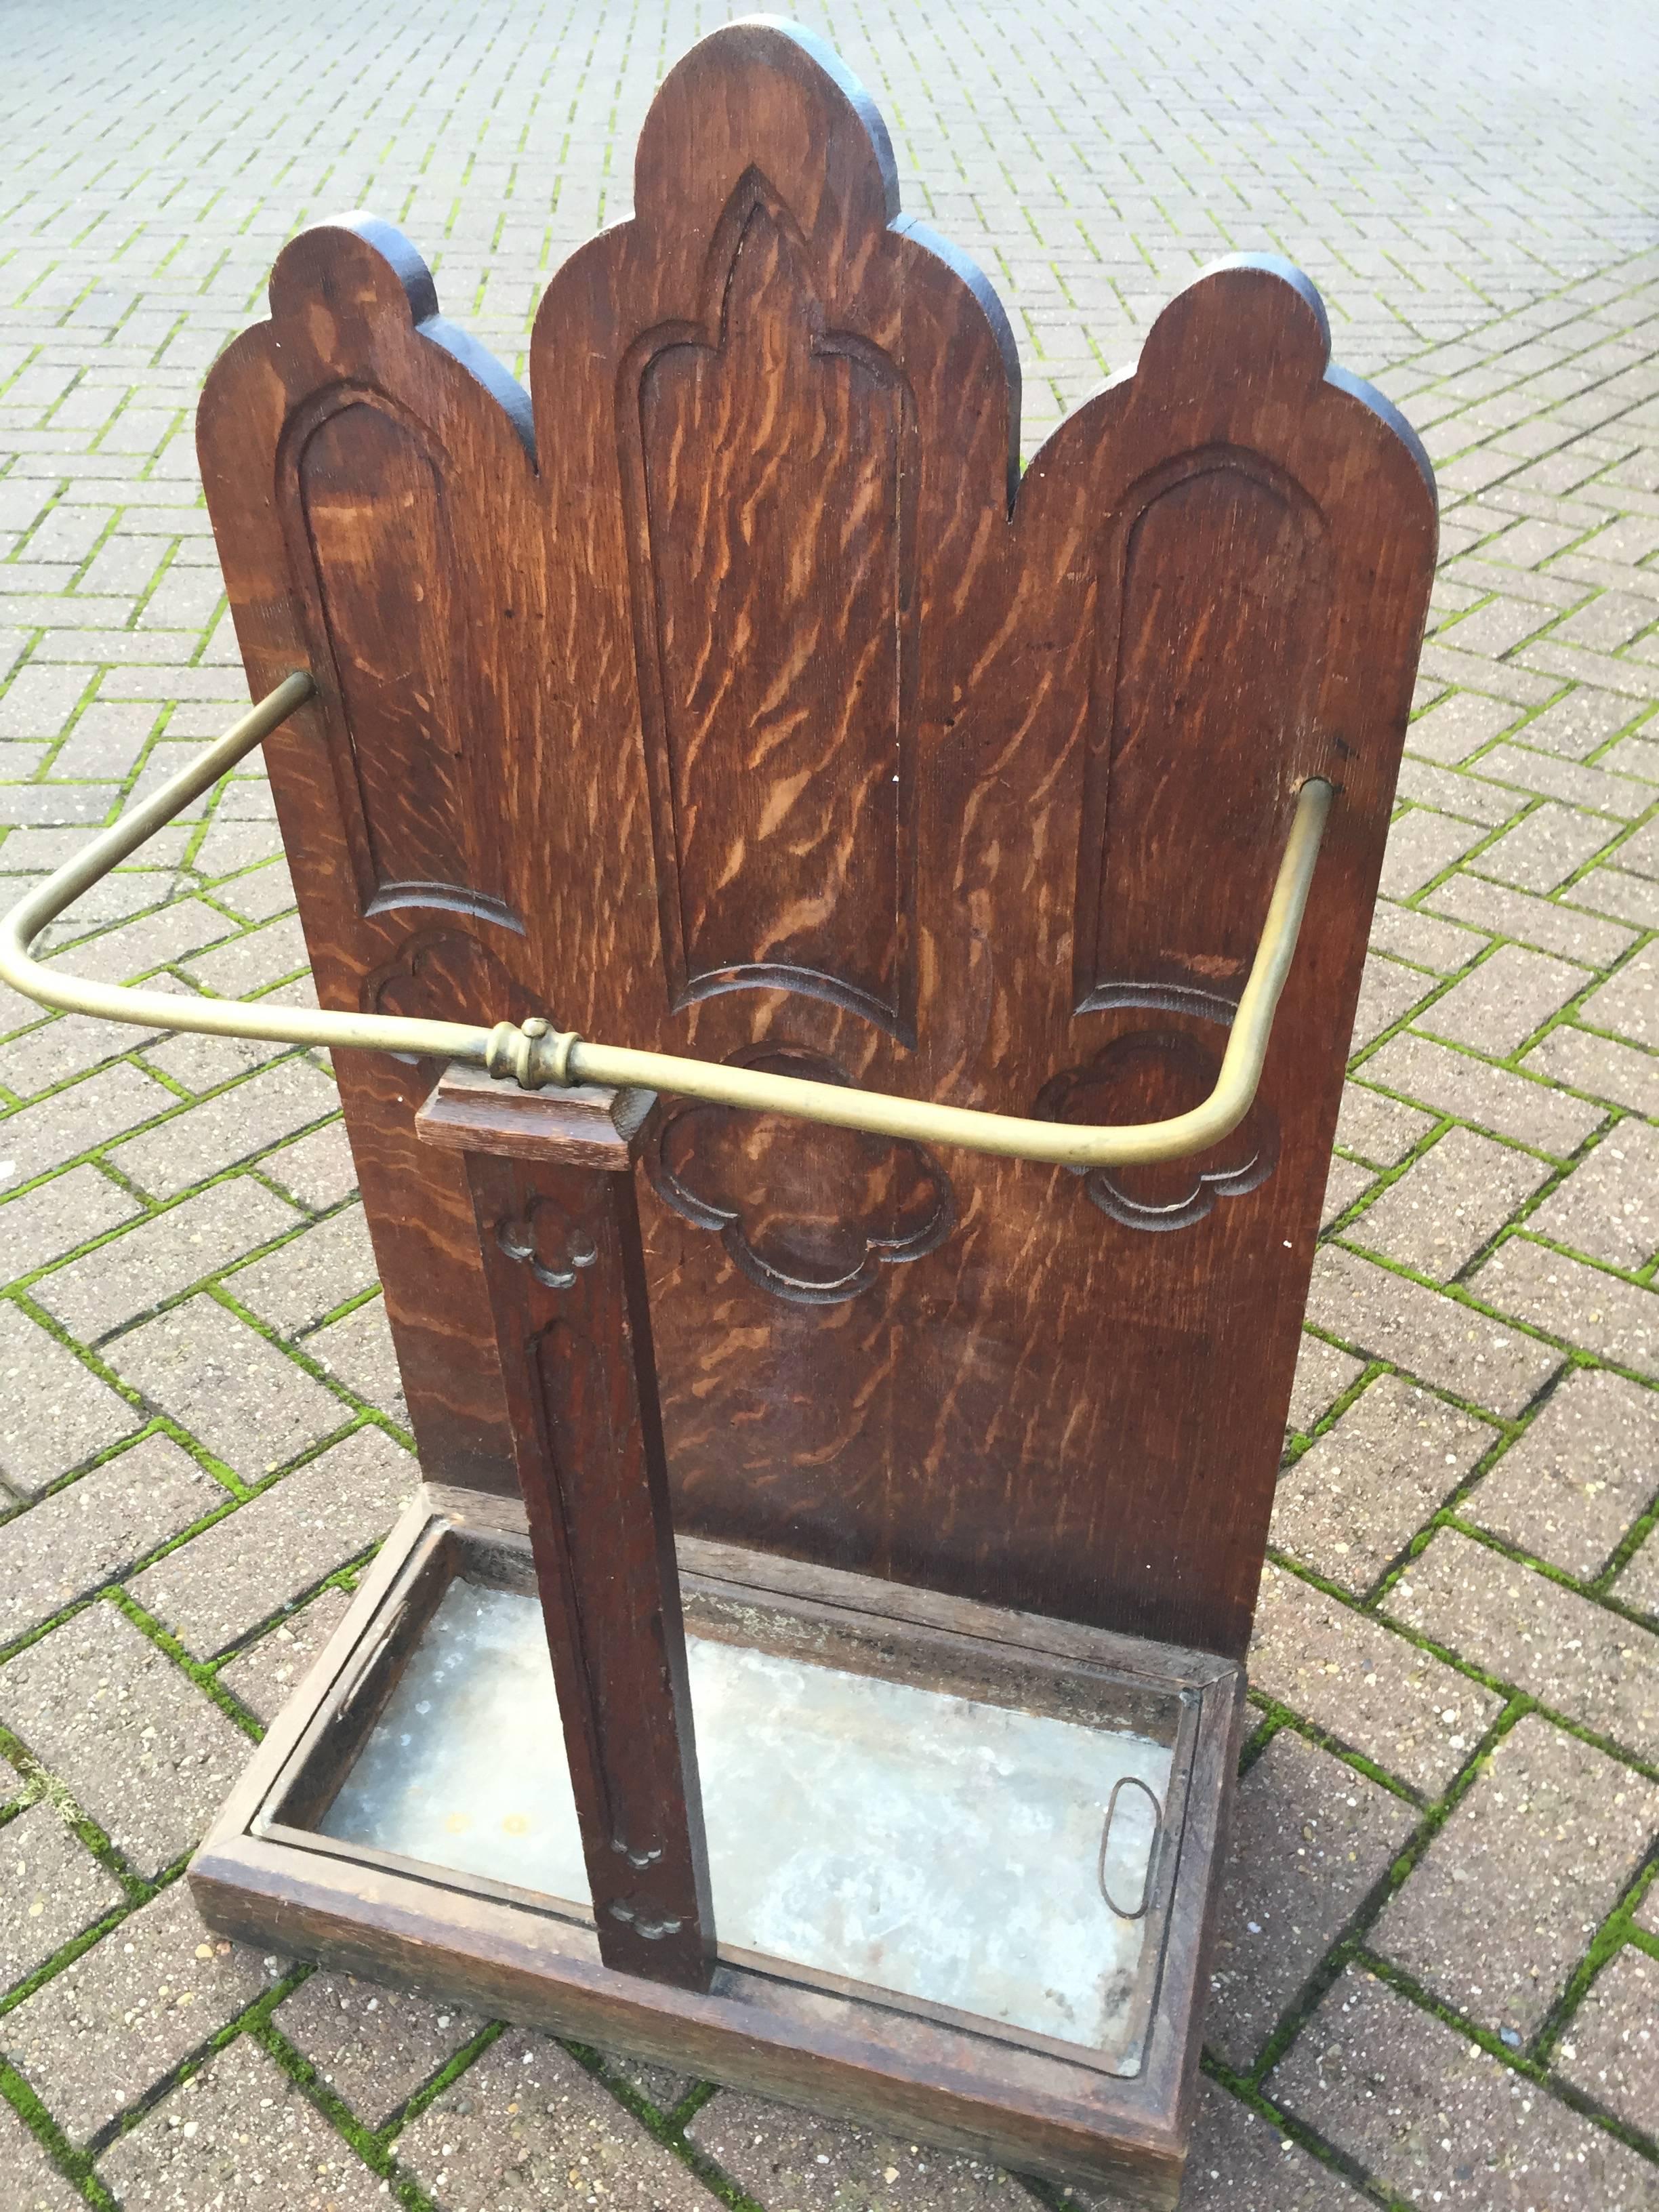 Turn of the Century Gothic Revival umbrella or stick stand.

This antique and rare, Gothic Revival umbrella stand has beautiful Gothic elements in the stunning, tiger oak panels. It is complete with the original zinc bottom and it will look great in